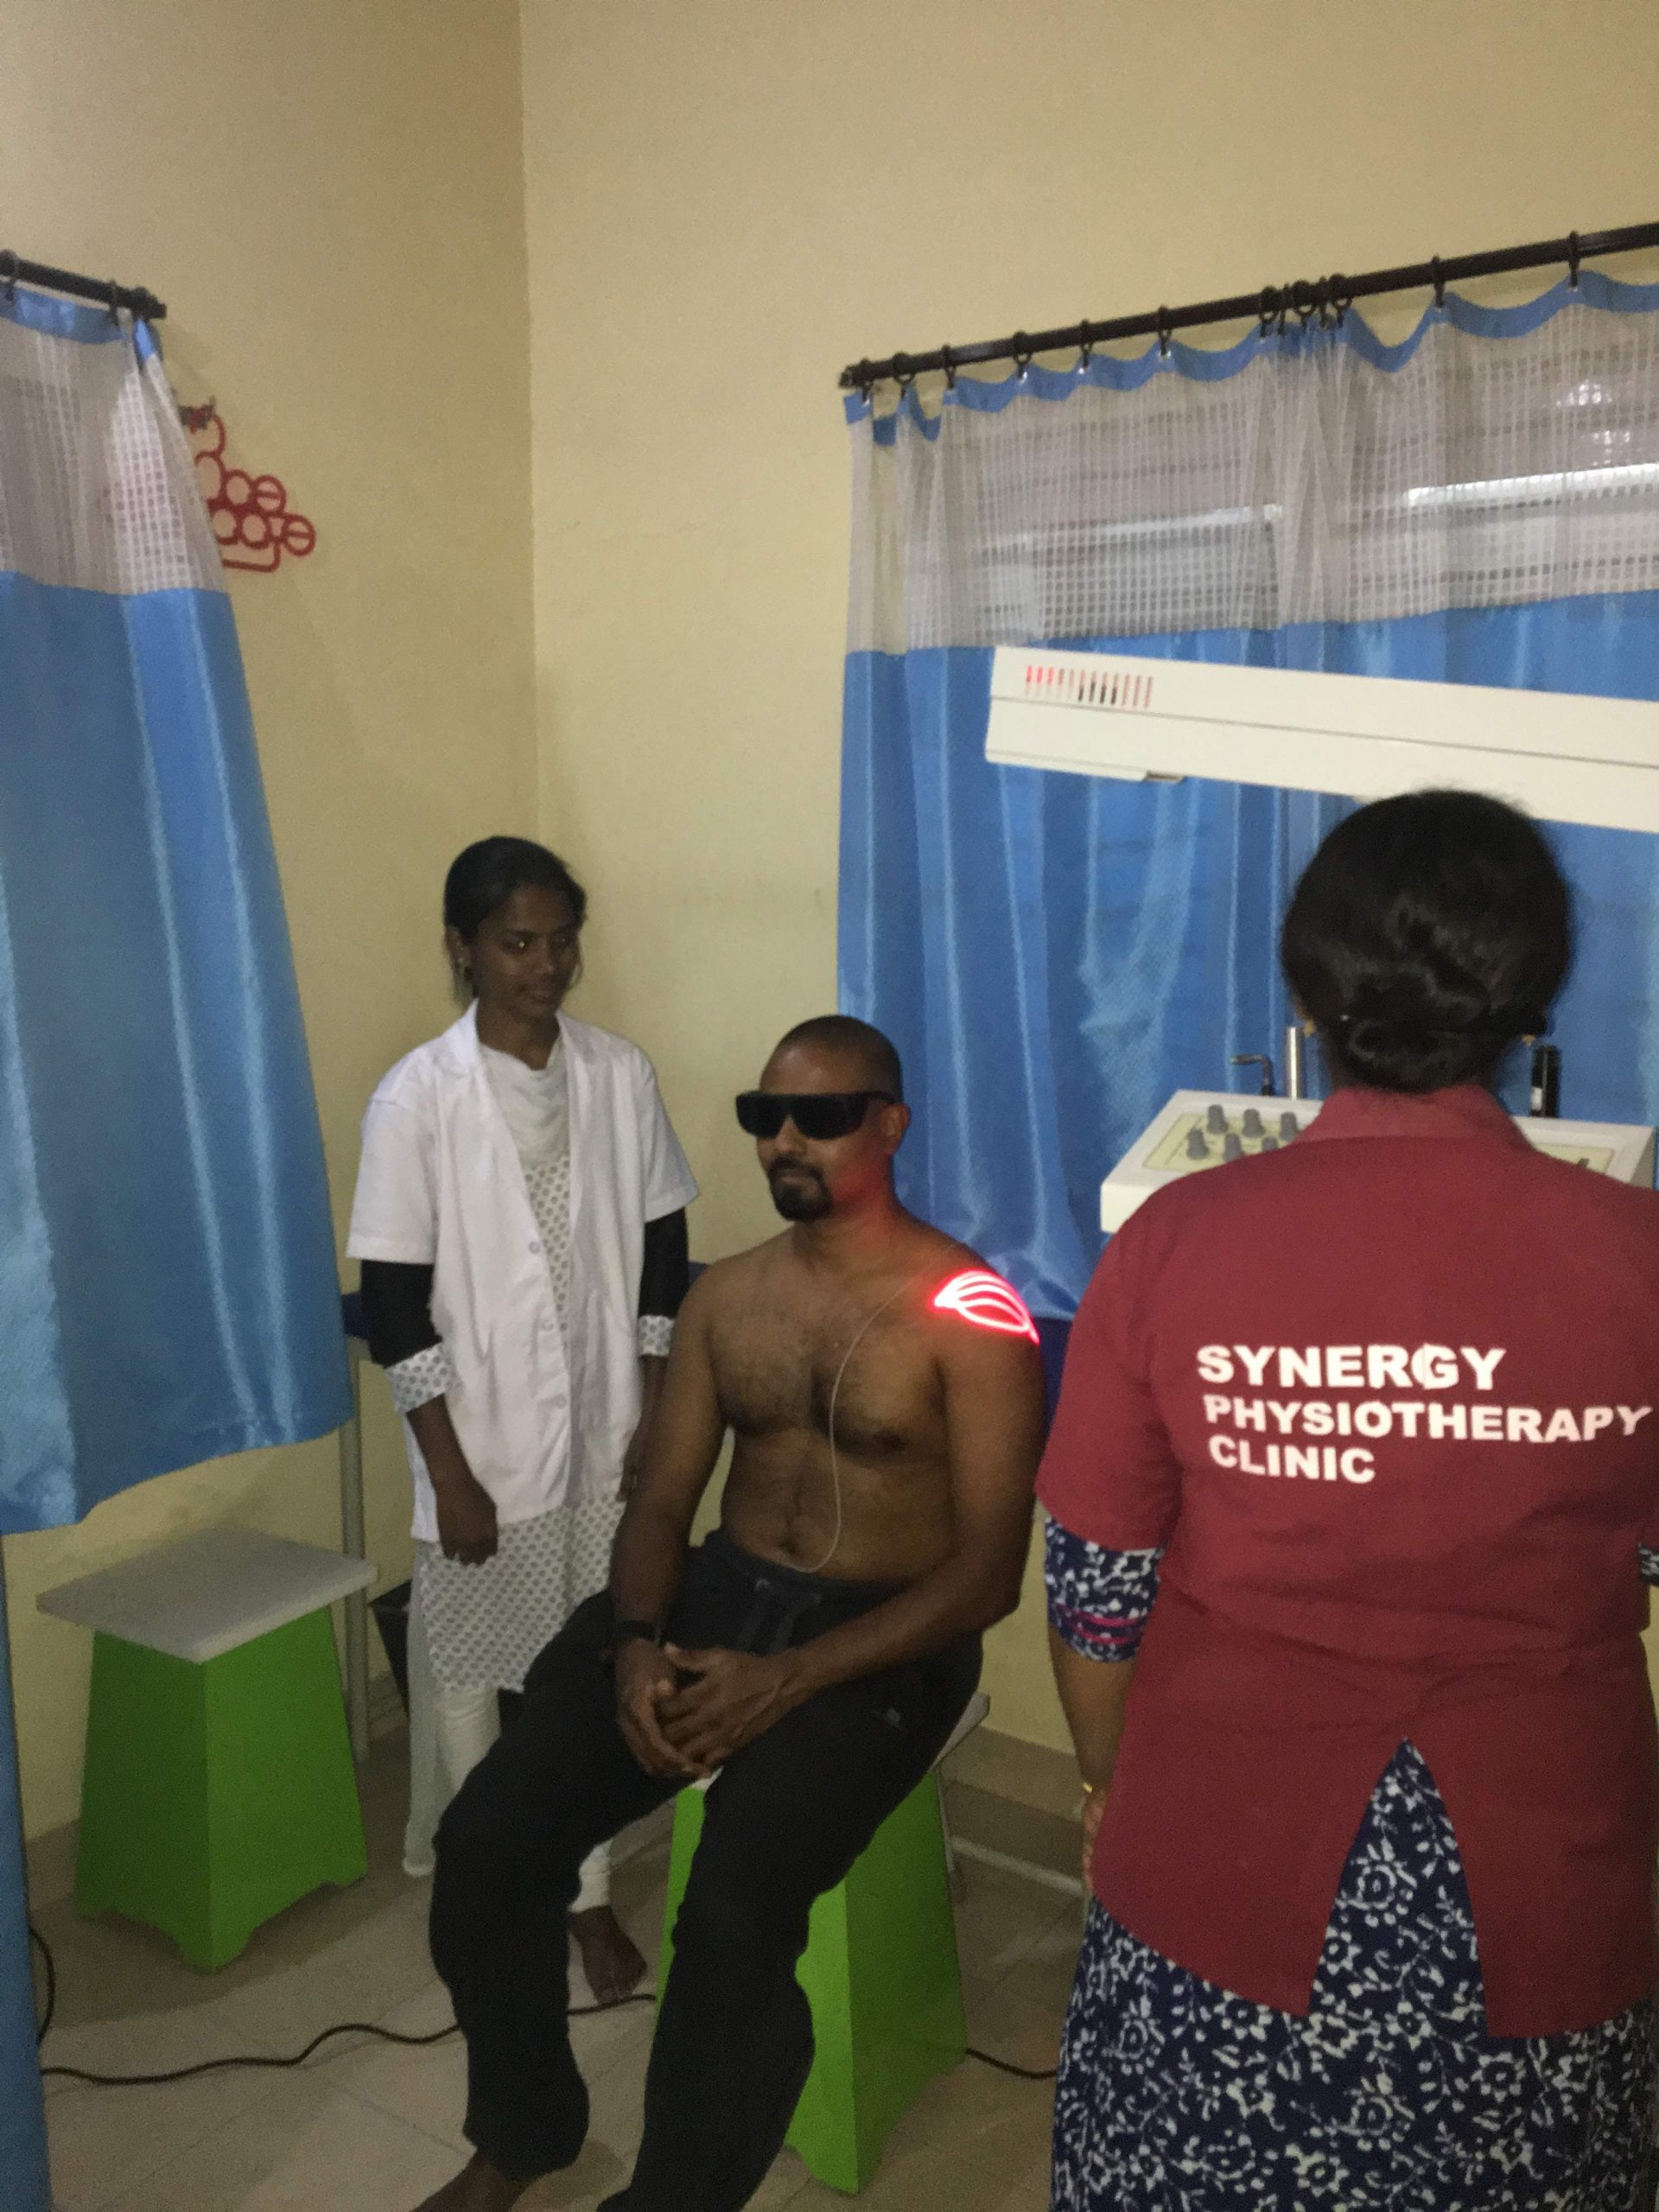 Laser Therapy Treatment,physiotherapy clinics in pai layout